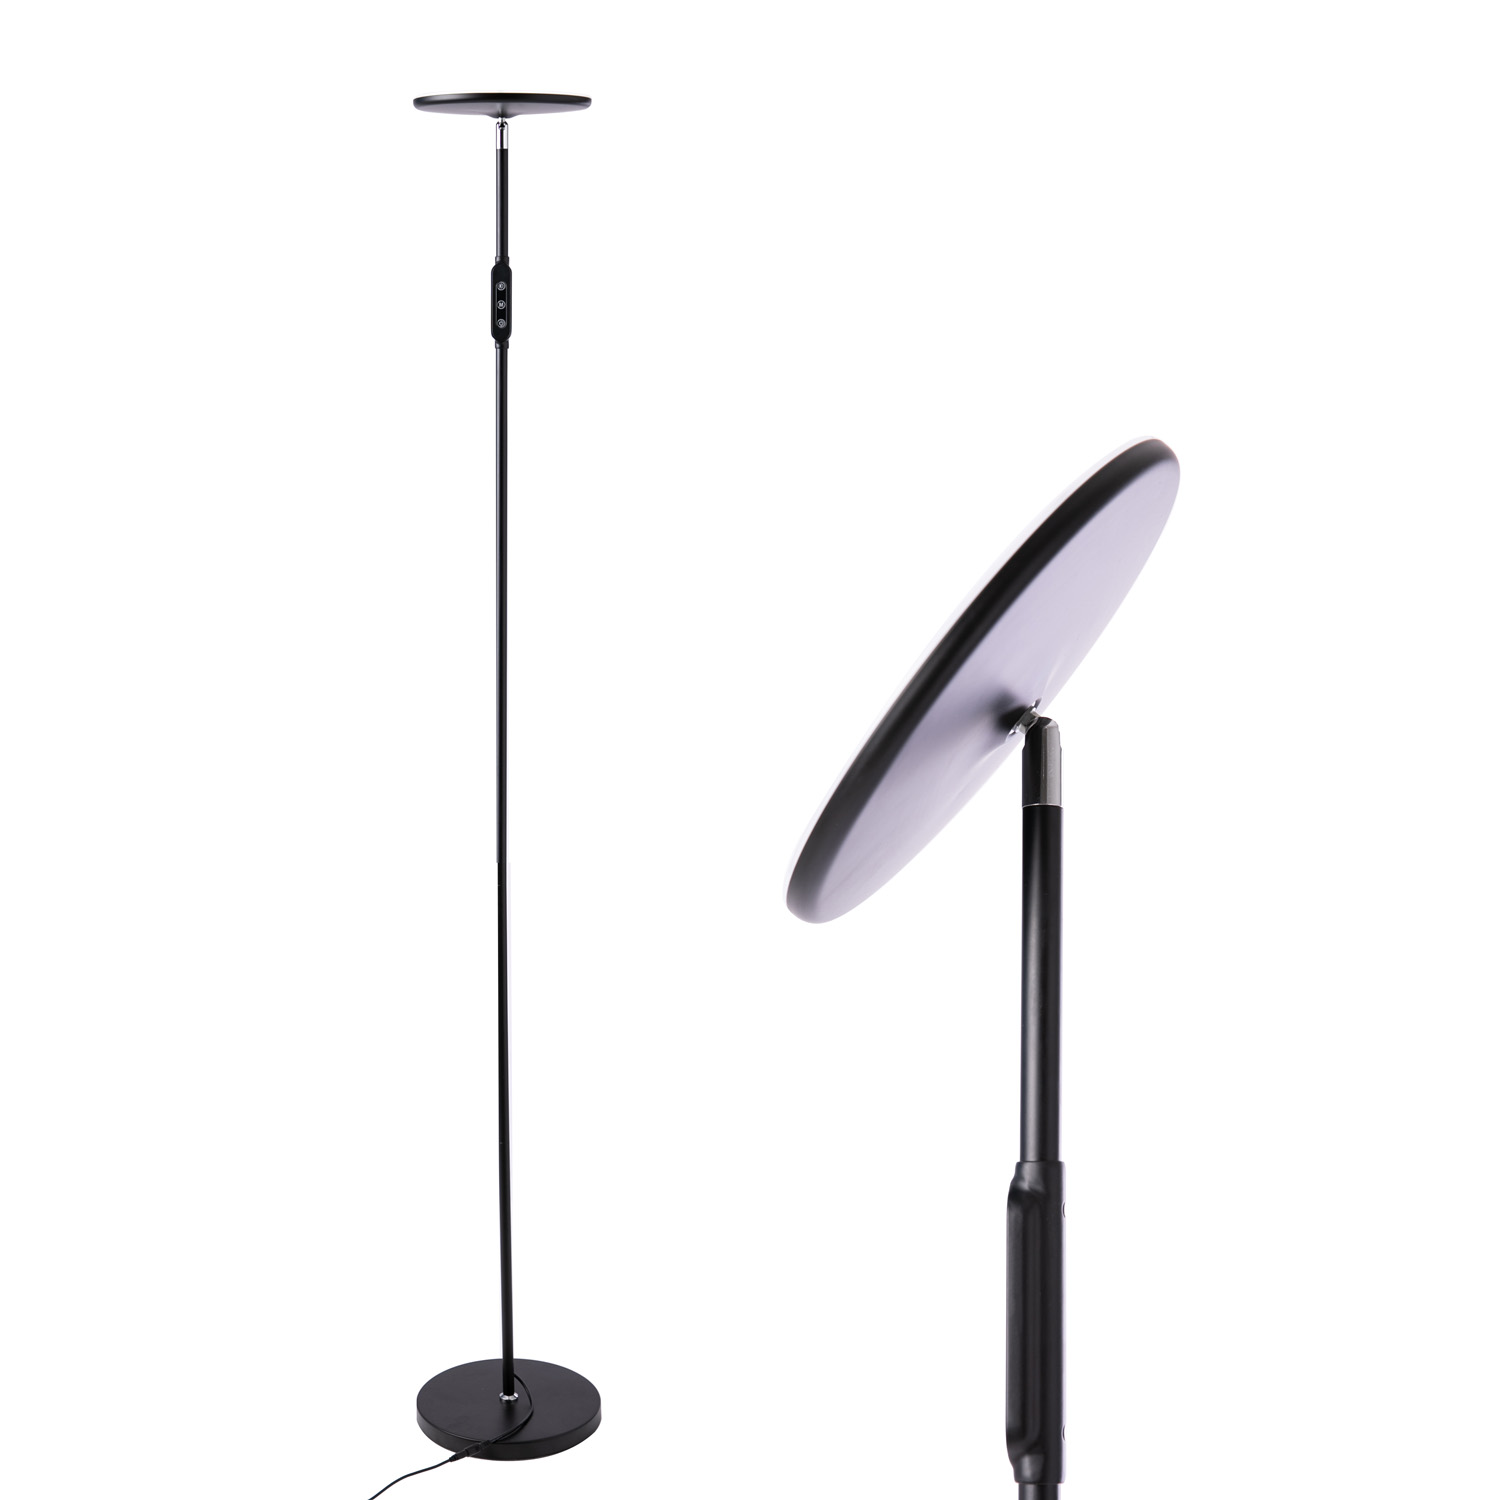 30W Sky LED Modern Torchiere Super Bright Floor Lamp (2)